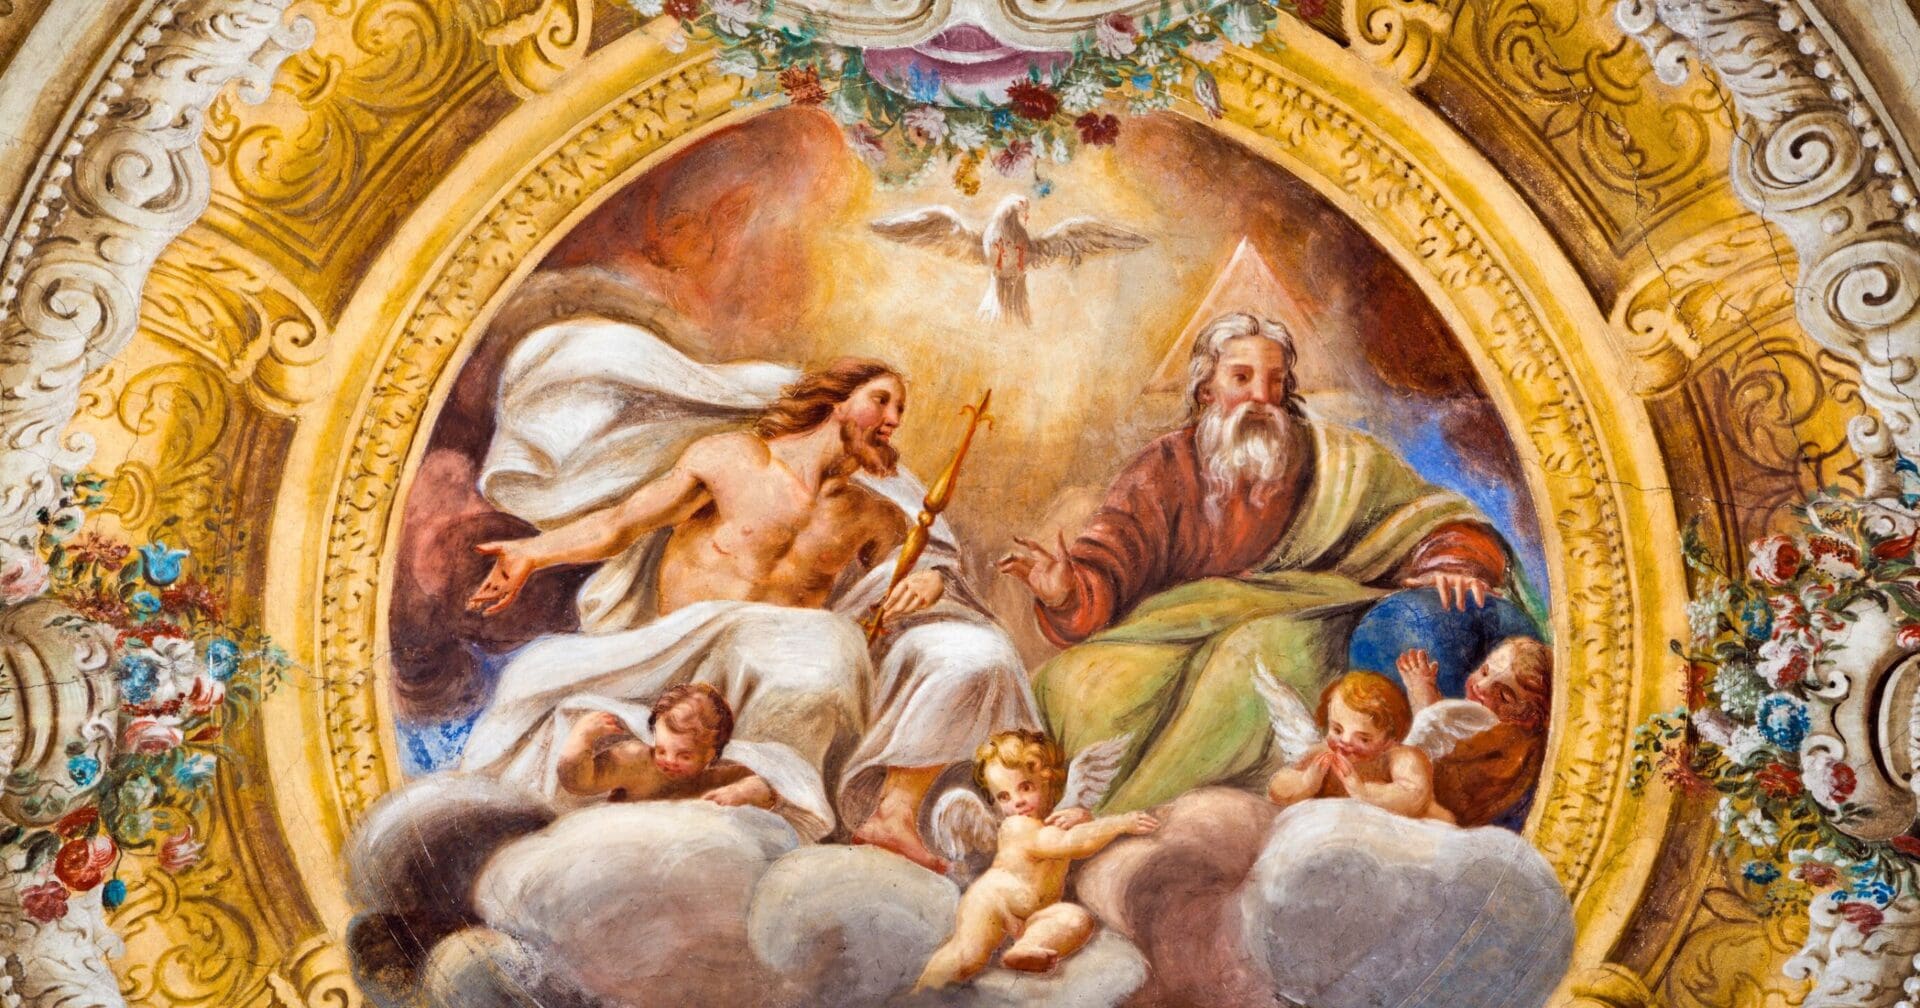 Solemnity of The Most Holy Trinity